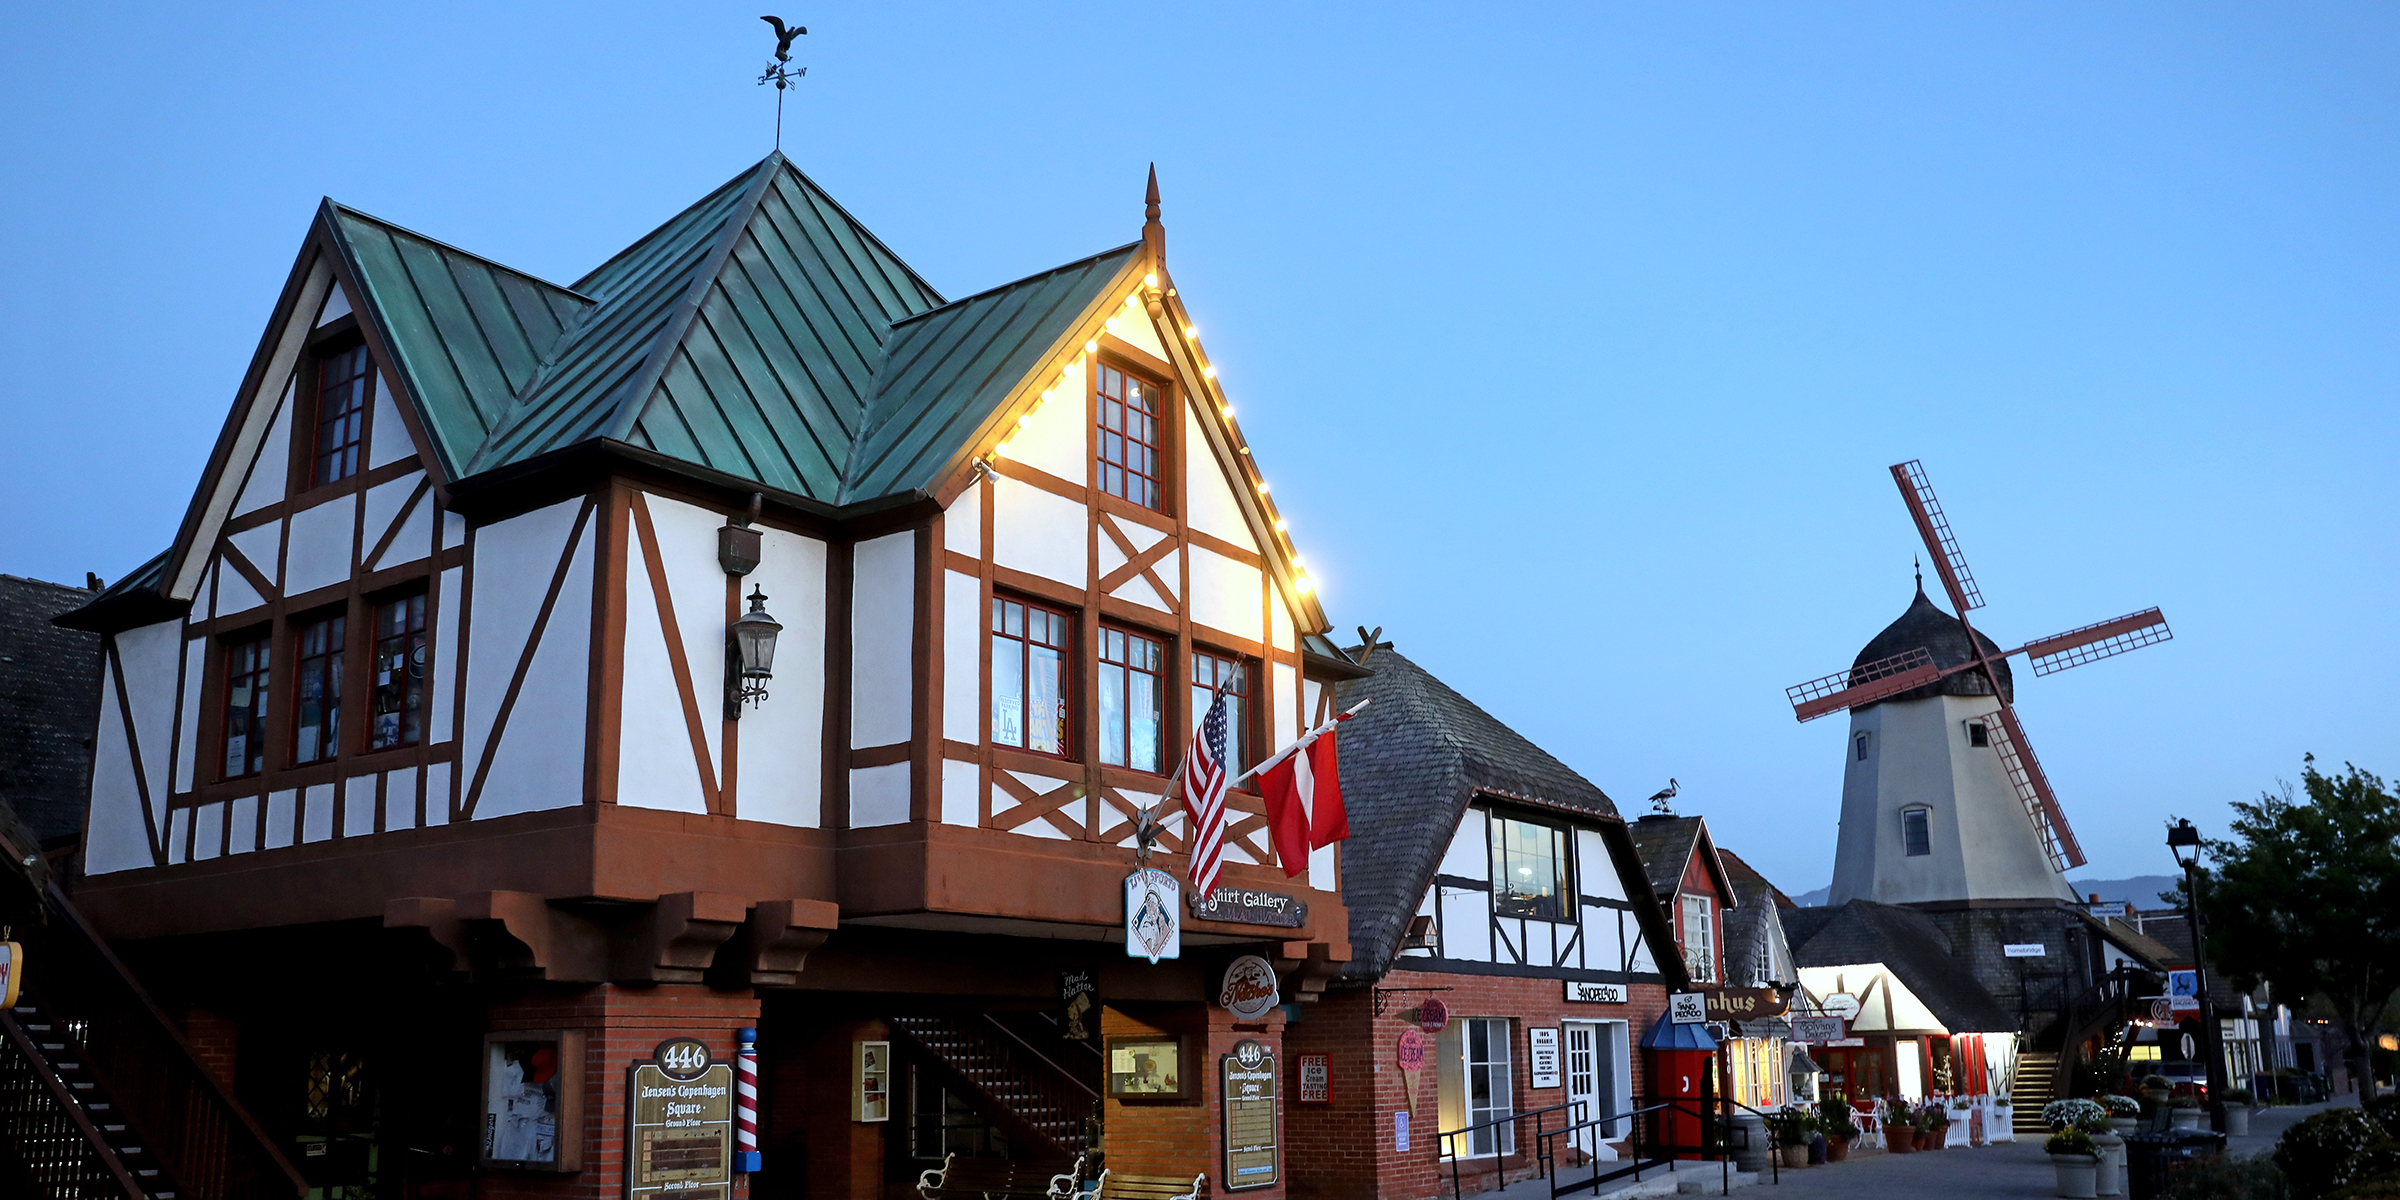 Unique buildings in Solvang | Source: Getty Images